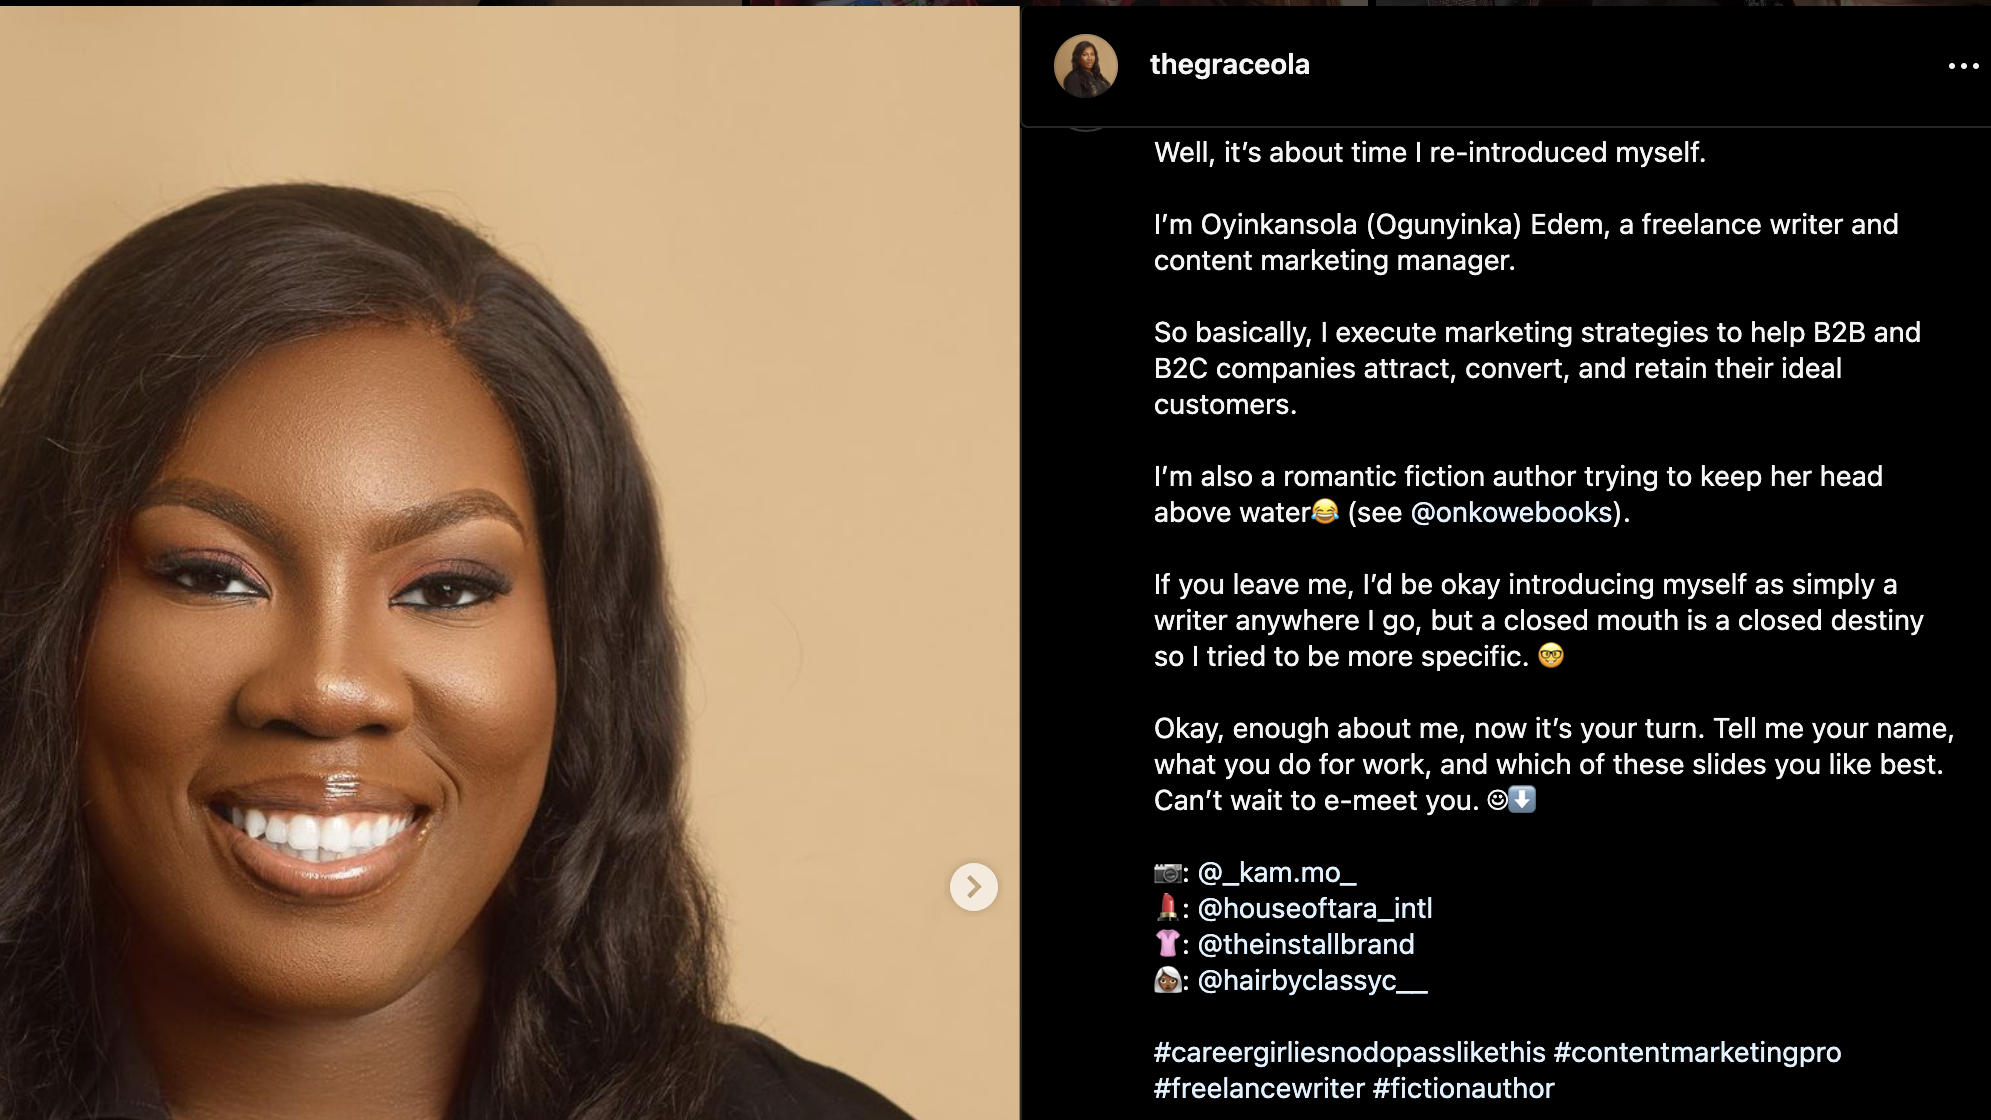 Oyinkansola Edem's Instagram post about her services and past experiences